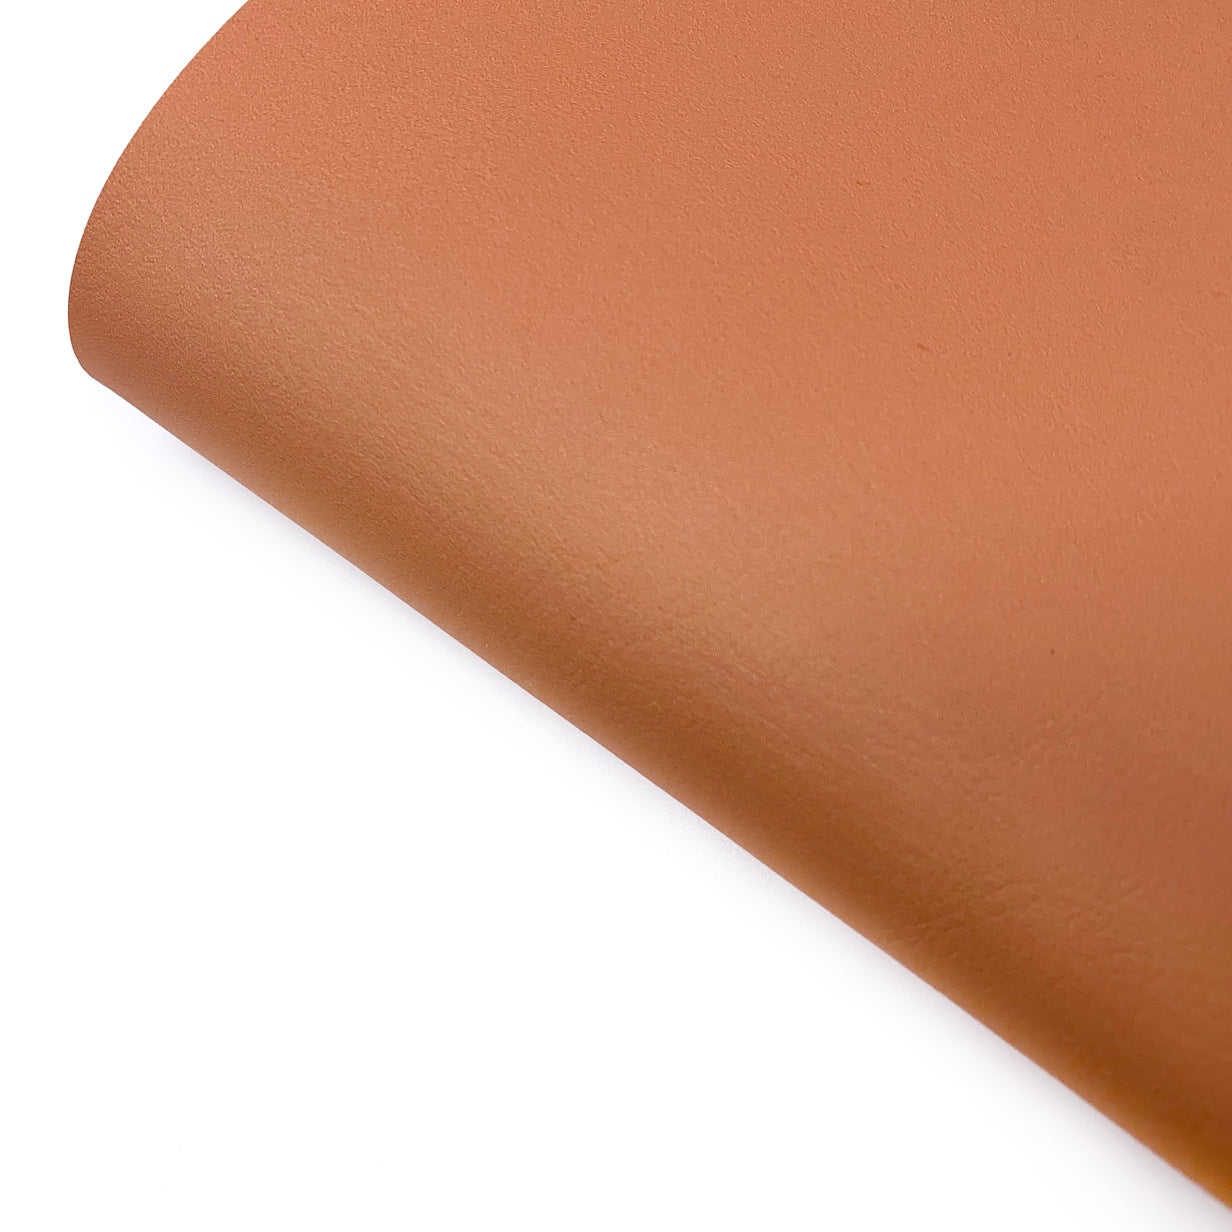 Wild Apricot Premium Faux Leather Fabric Sheets